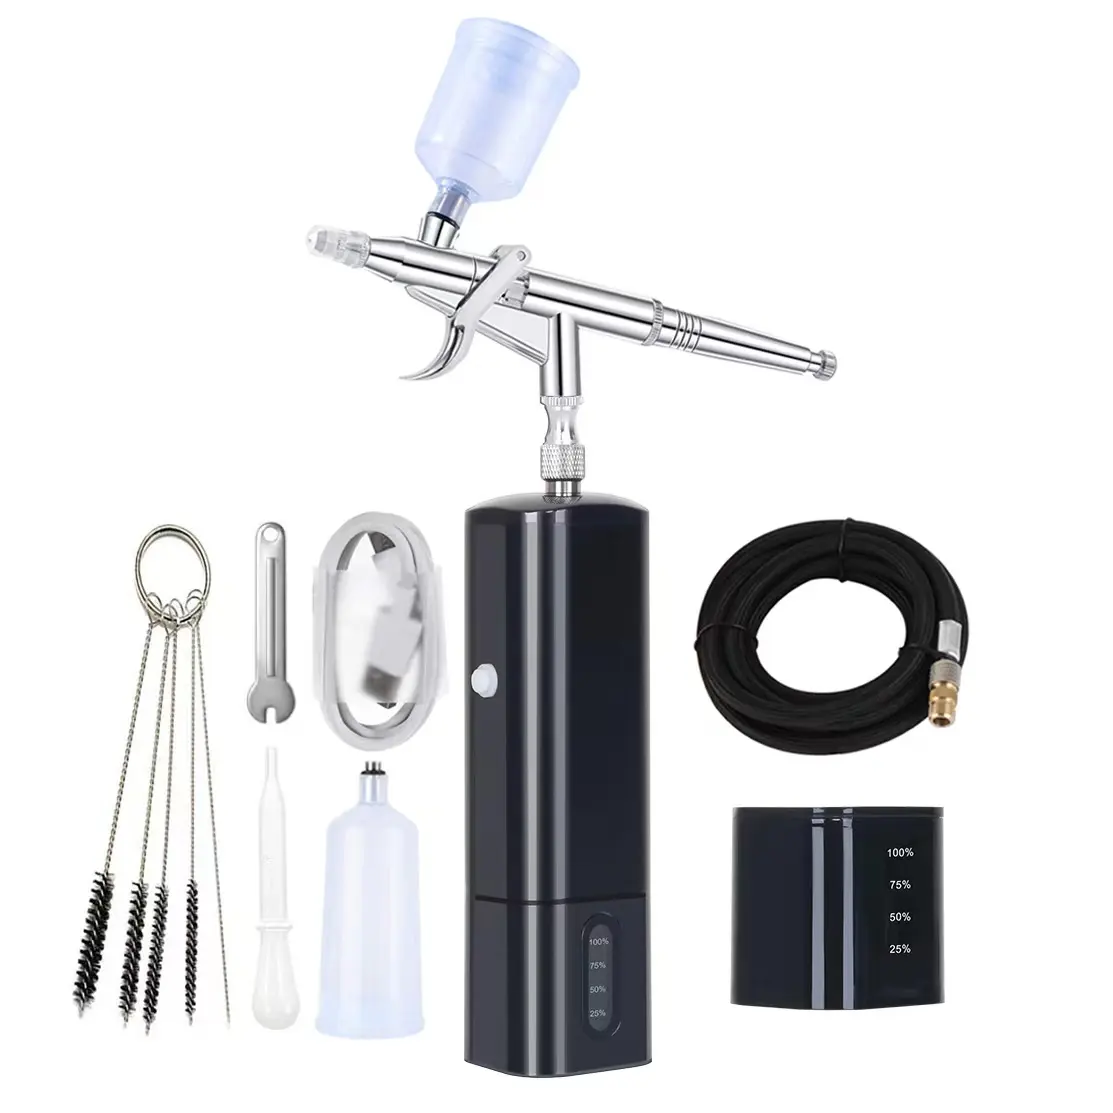 Newest Battery Replaceable Aerografo Integrated Mini Airbrush Barber Makeup Air Brush Compressor With Dual Action Gun Wireless